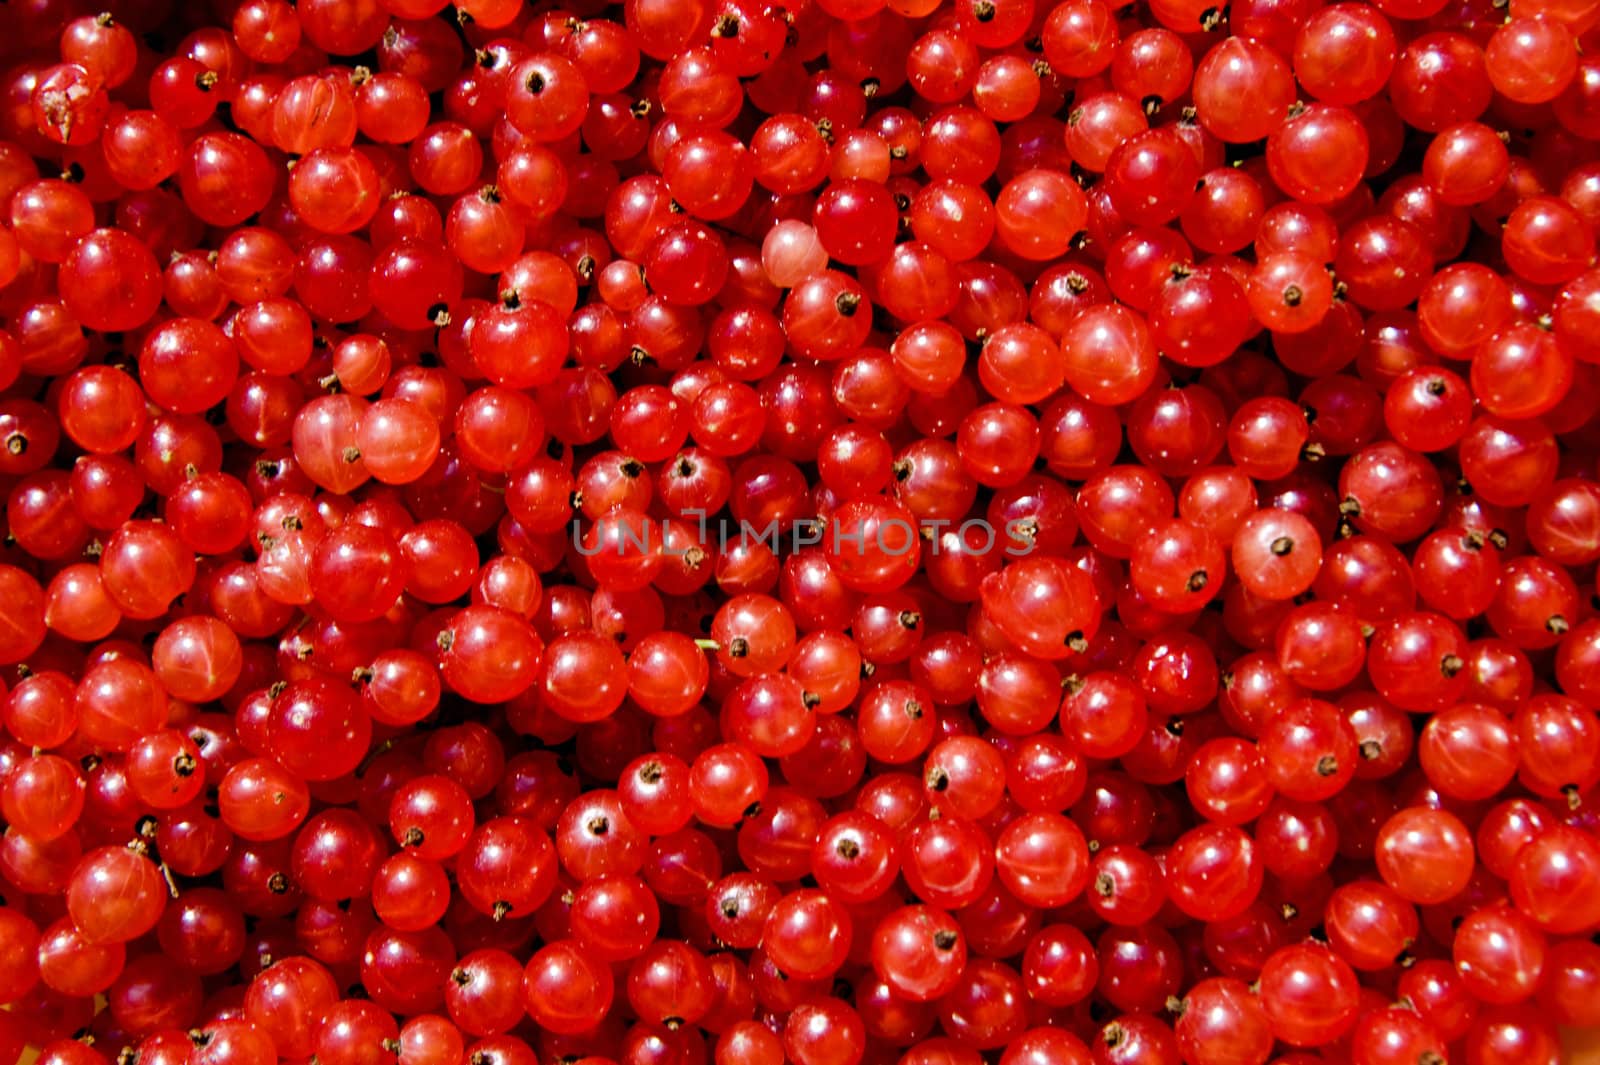 The reaped crop of a currant taken as macro